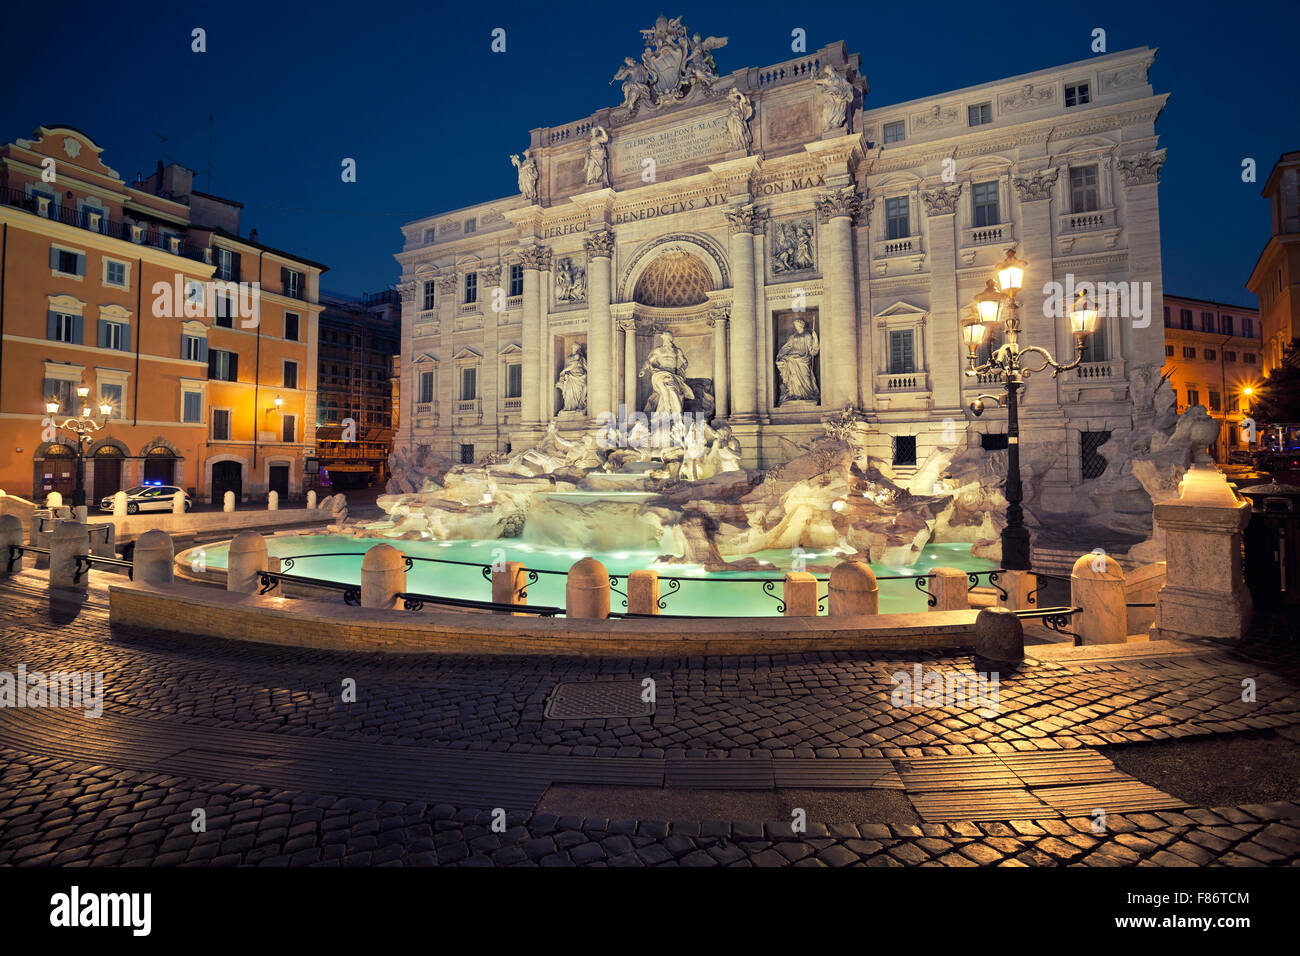 Rome. Image of famous Trevi Fountain in Rome, Italy. Stock Photo